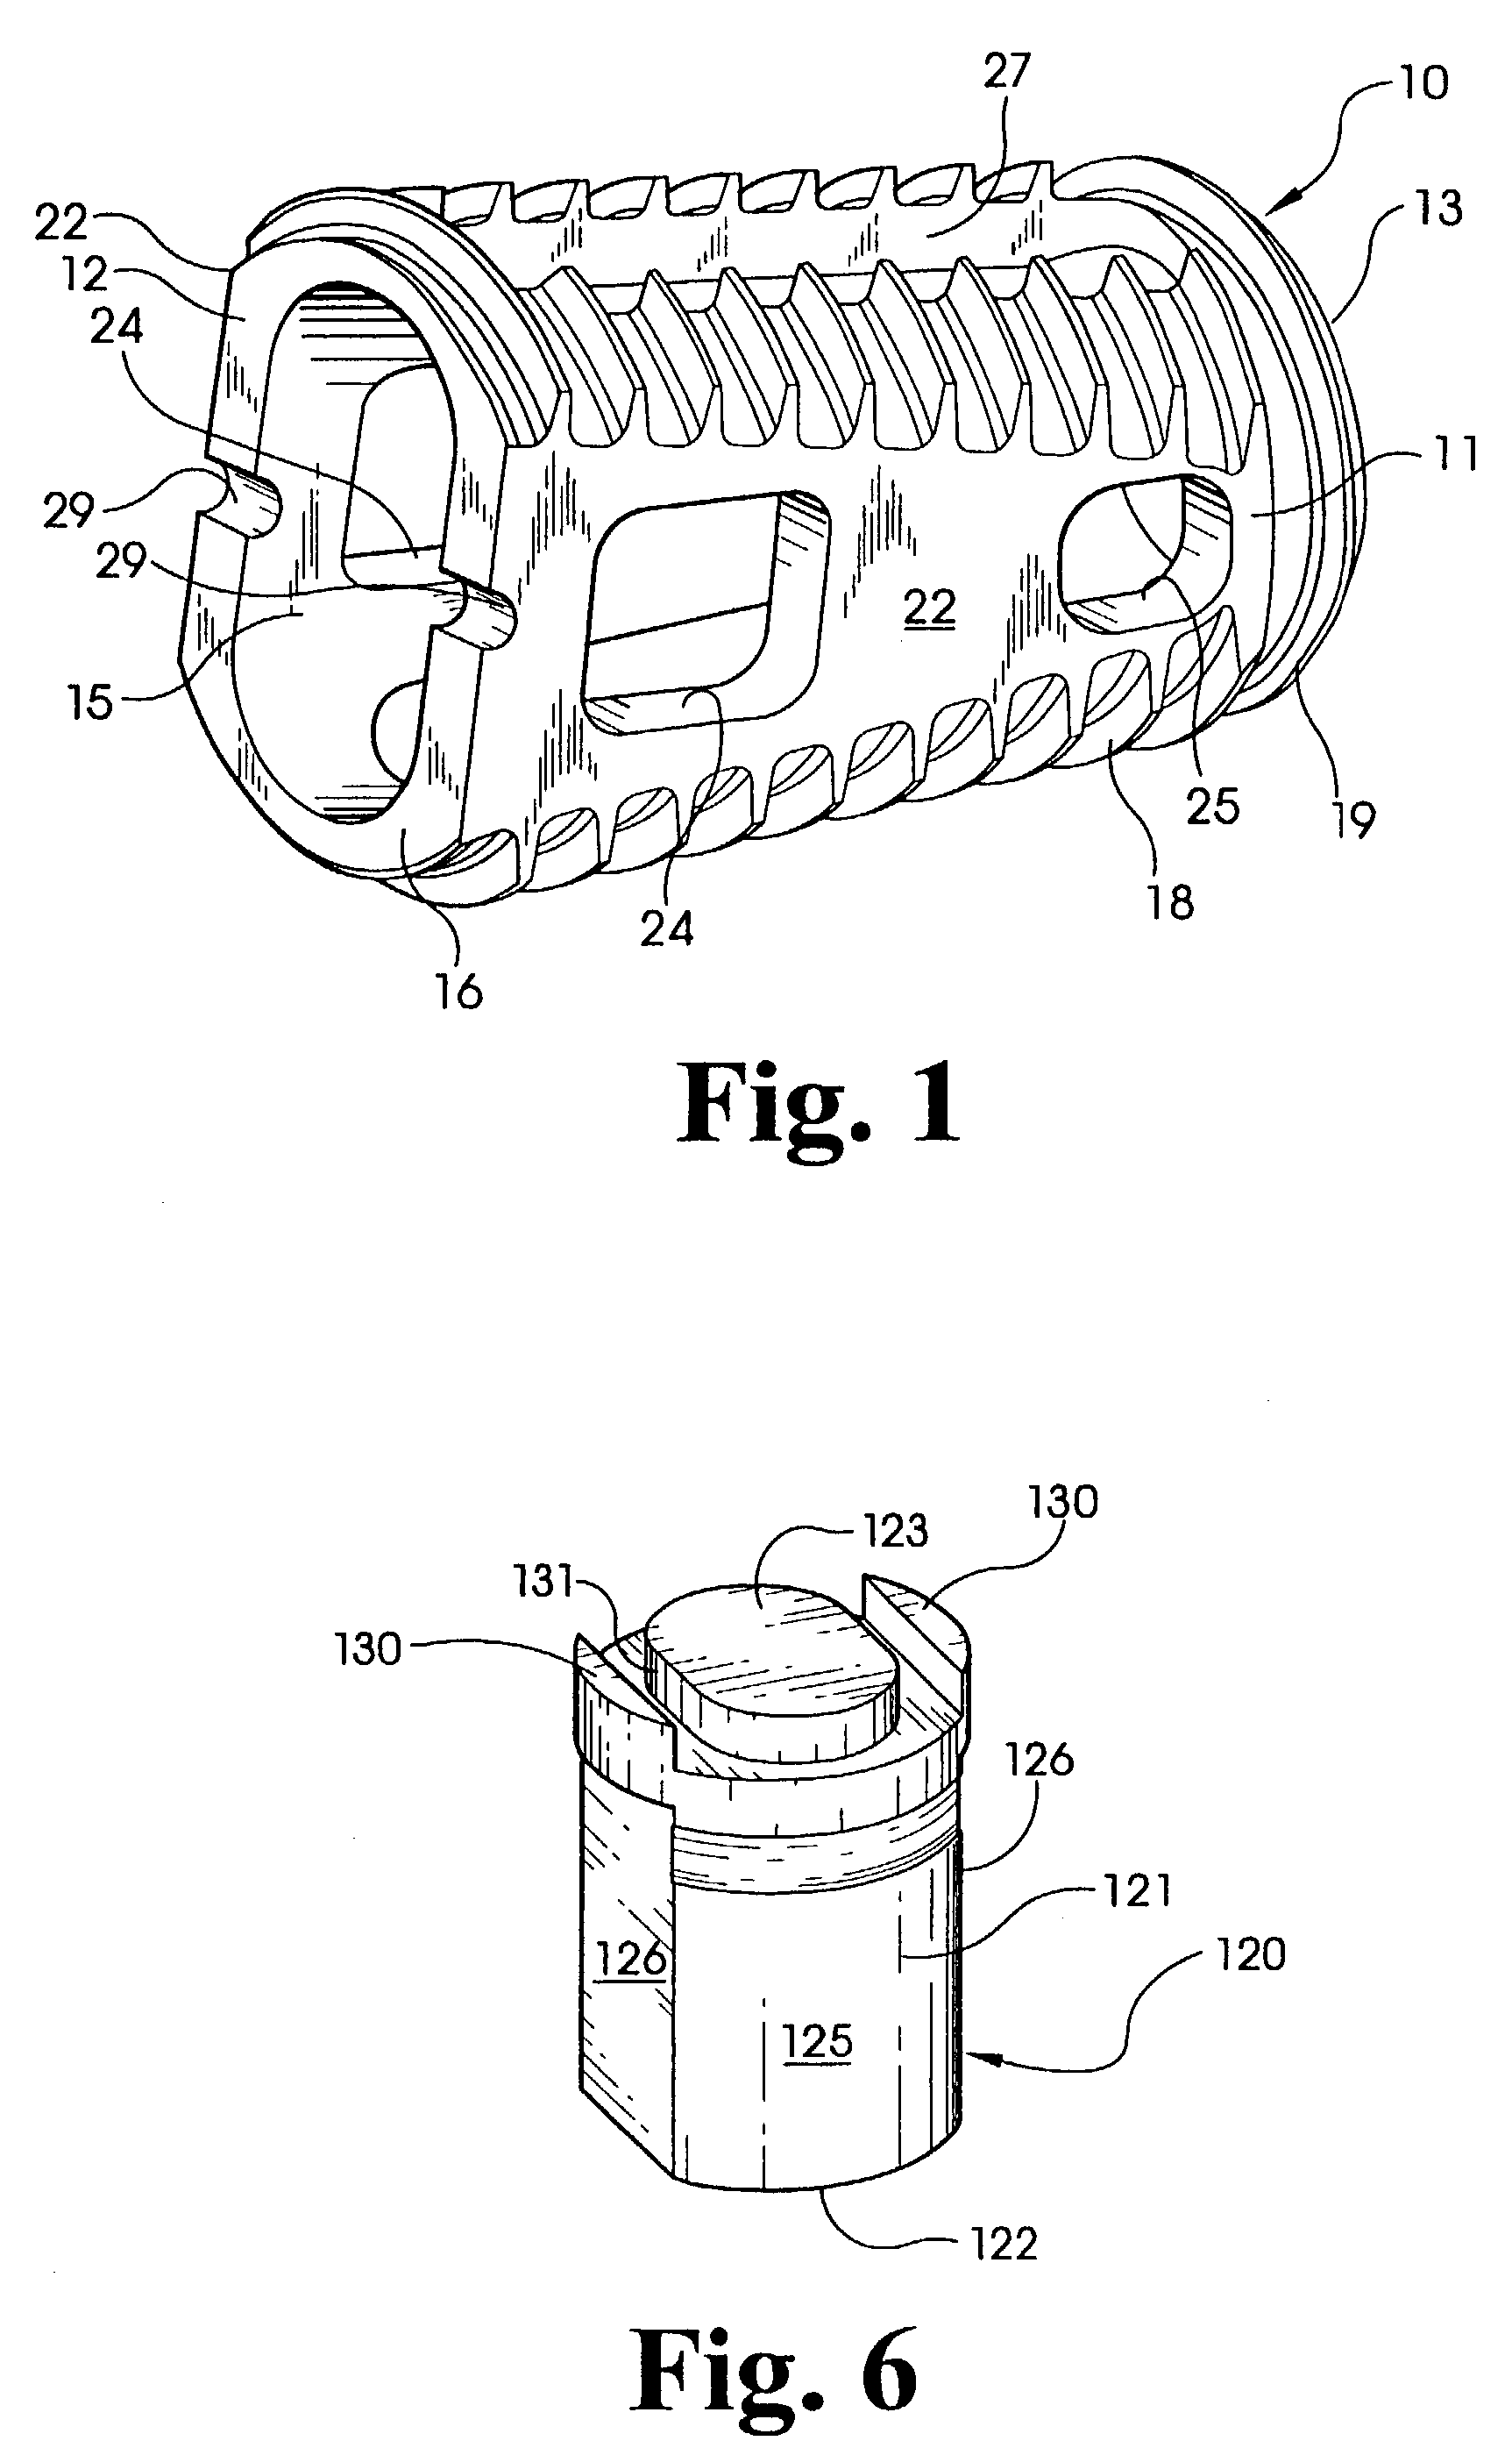 Methods and instruments for interbody fusion